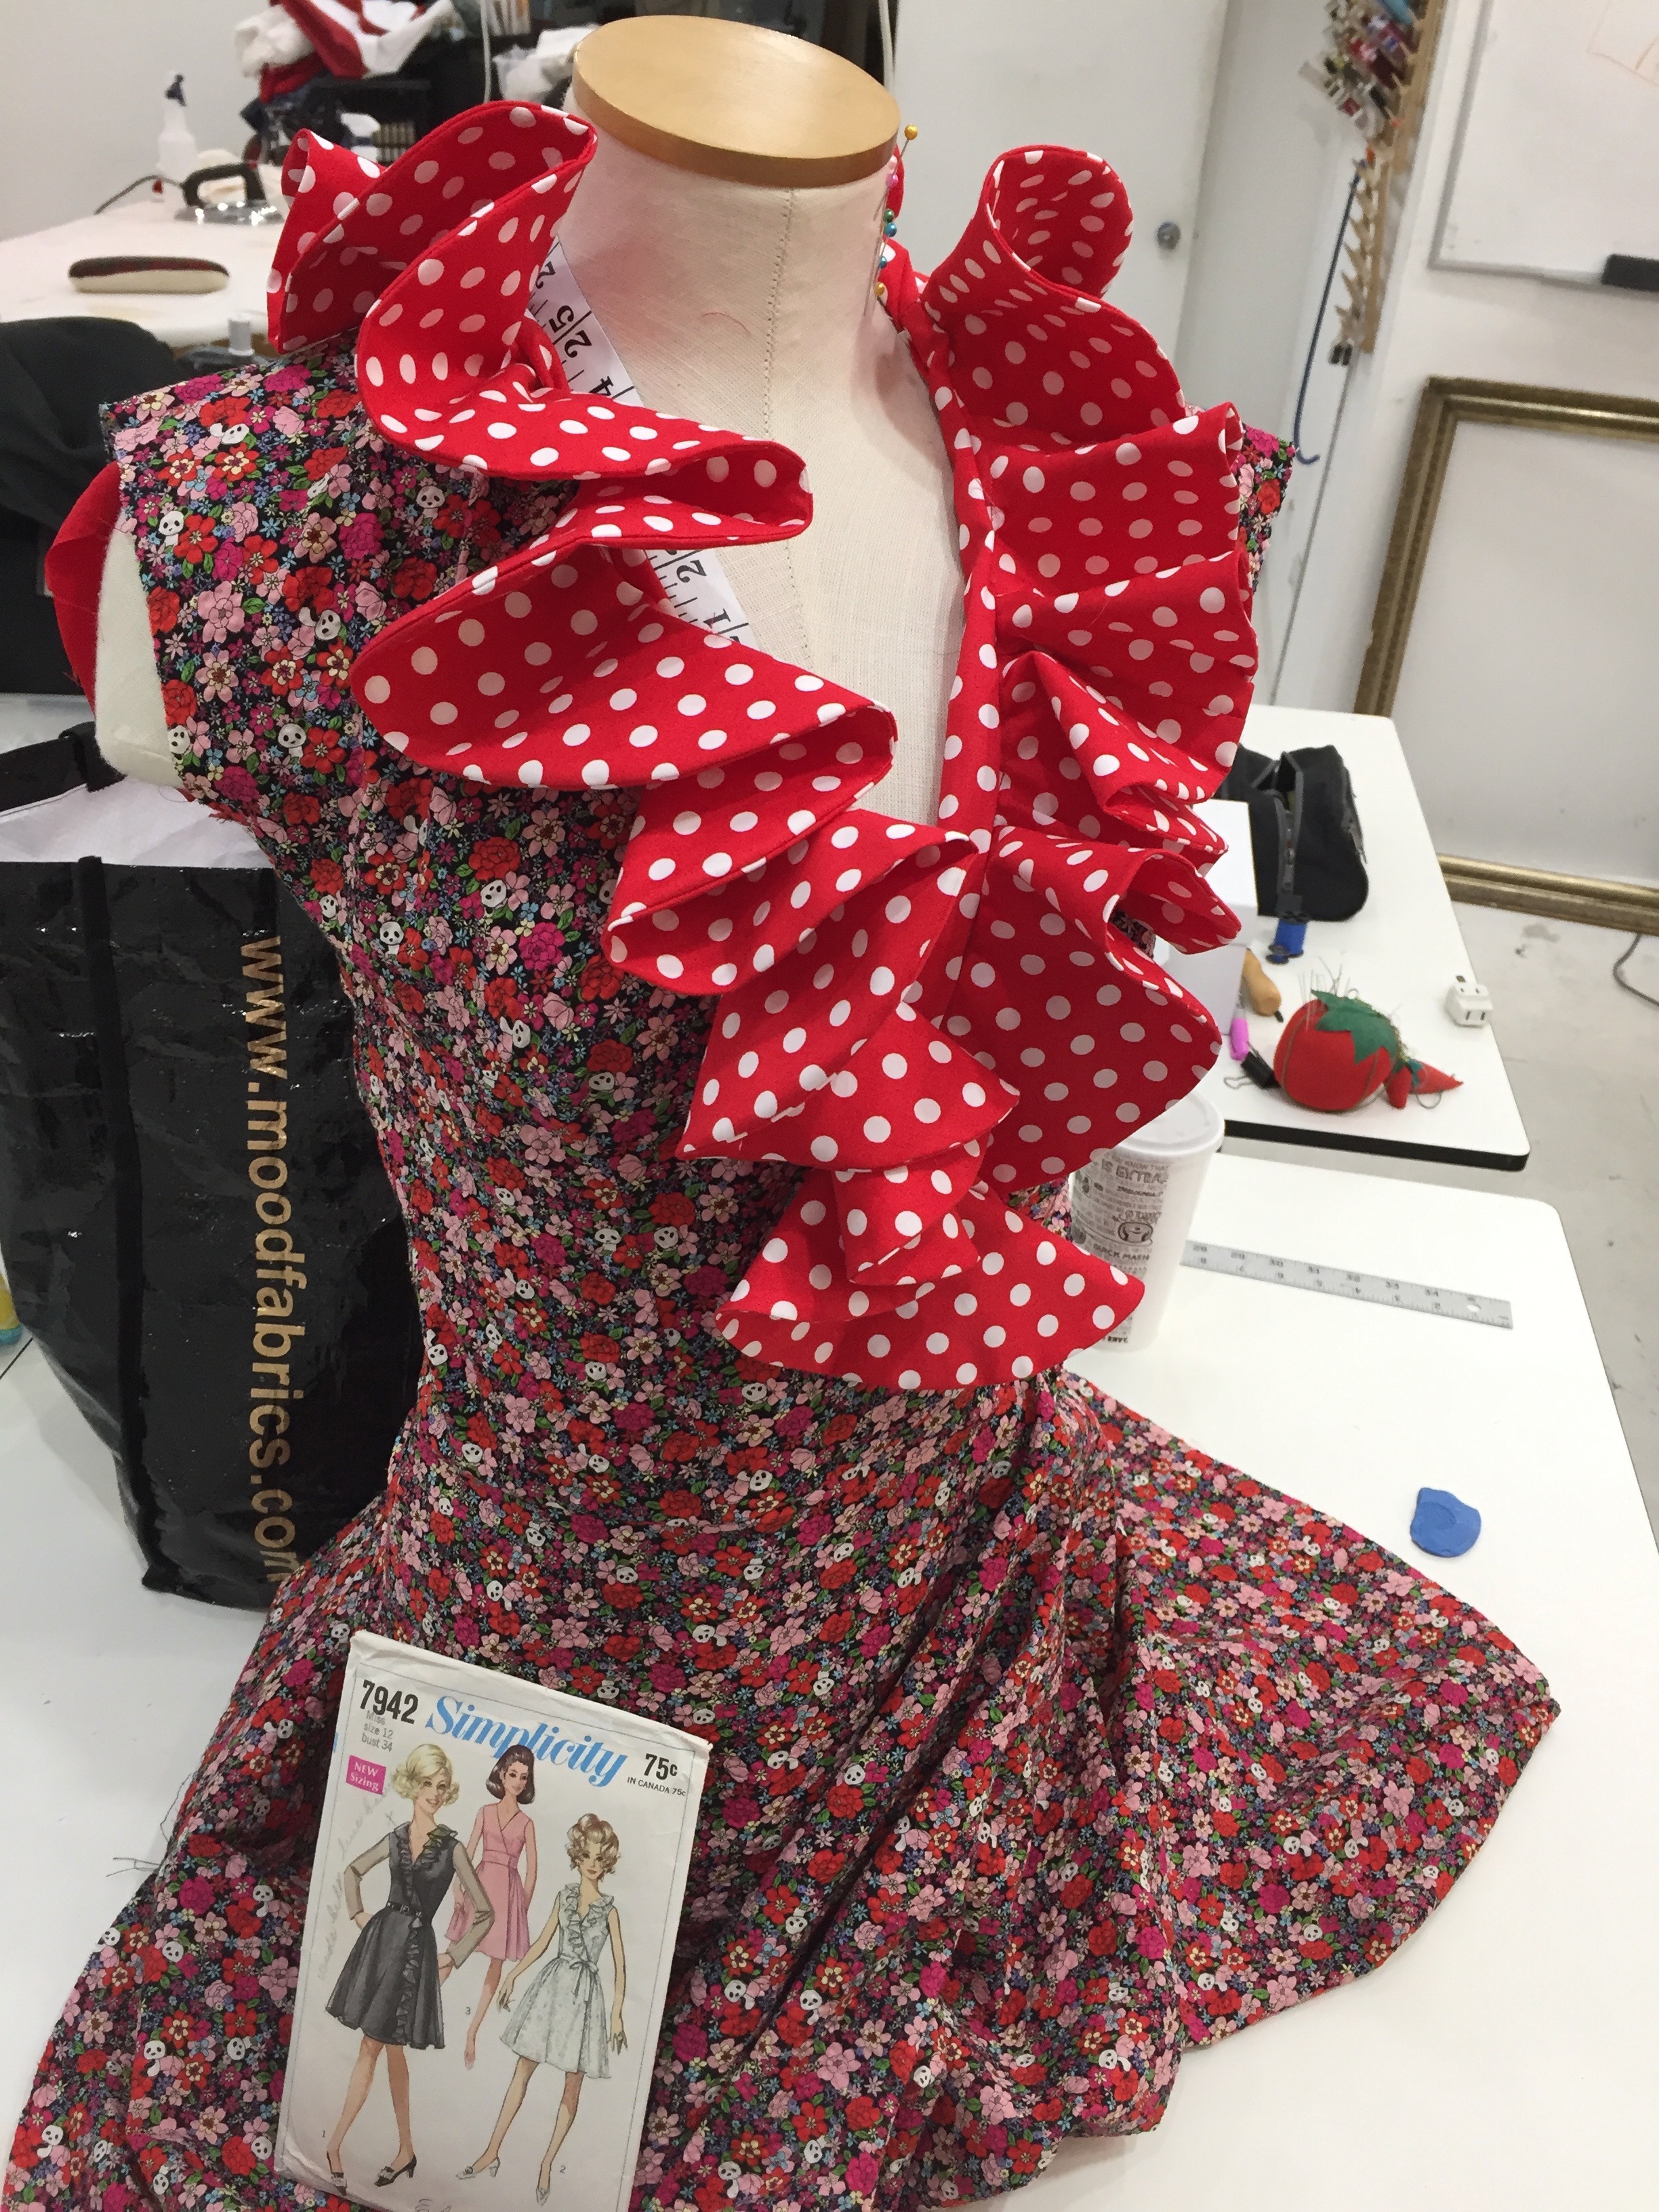 Sewing classes in chicago: tchad: workroom: studio: Simplicity: 7942: erin: tchad: lacroix inspired: japanese fabric: final dress: table